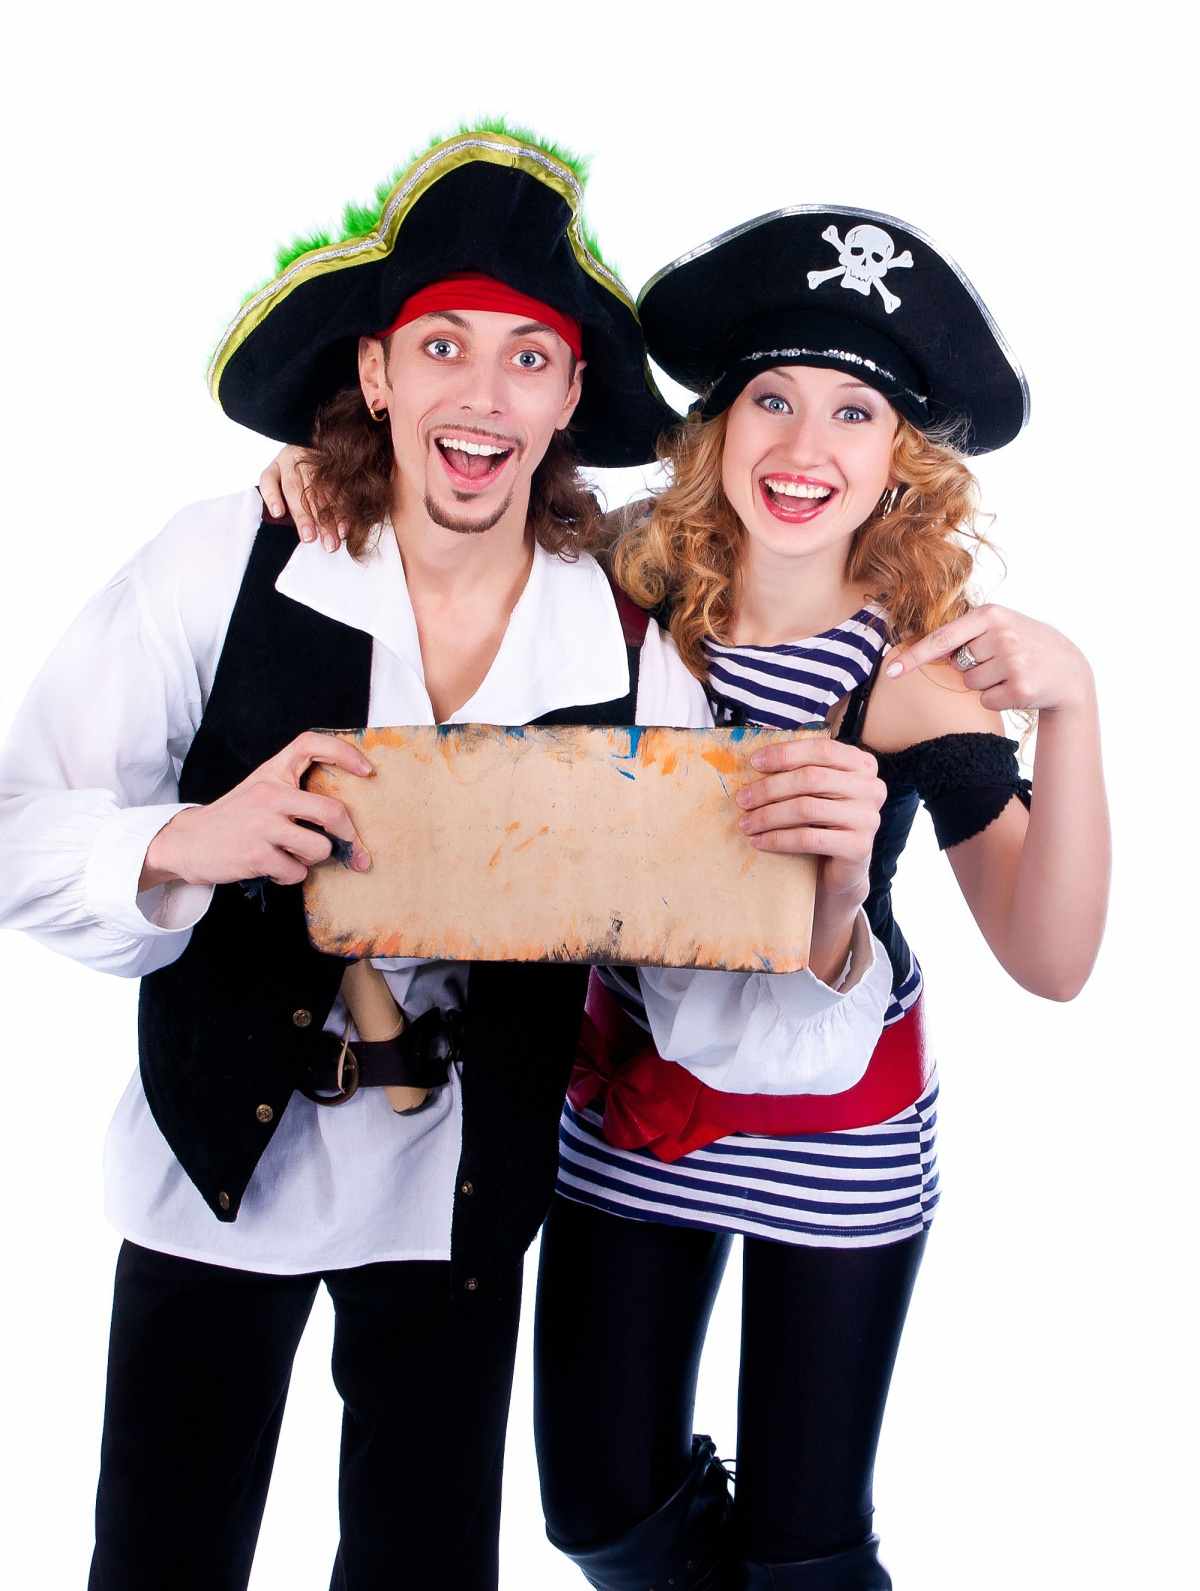 A man and woman wearing DIY pirate costumes, holding a blank scroll of paper.